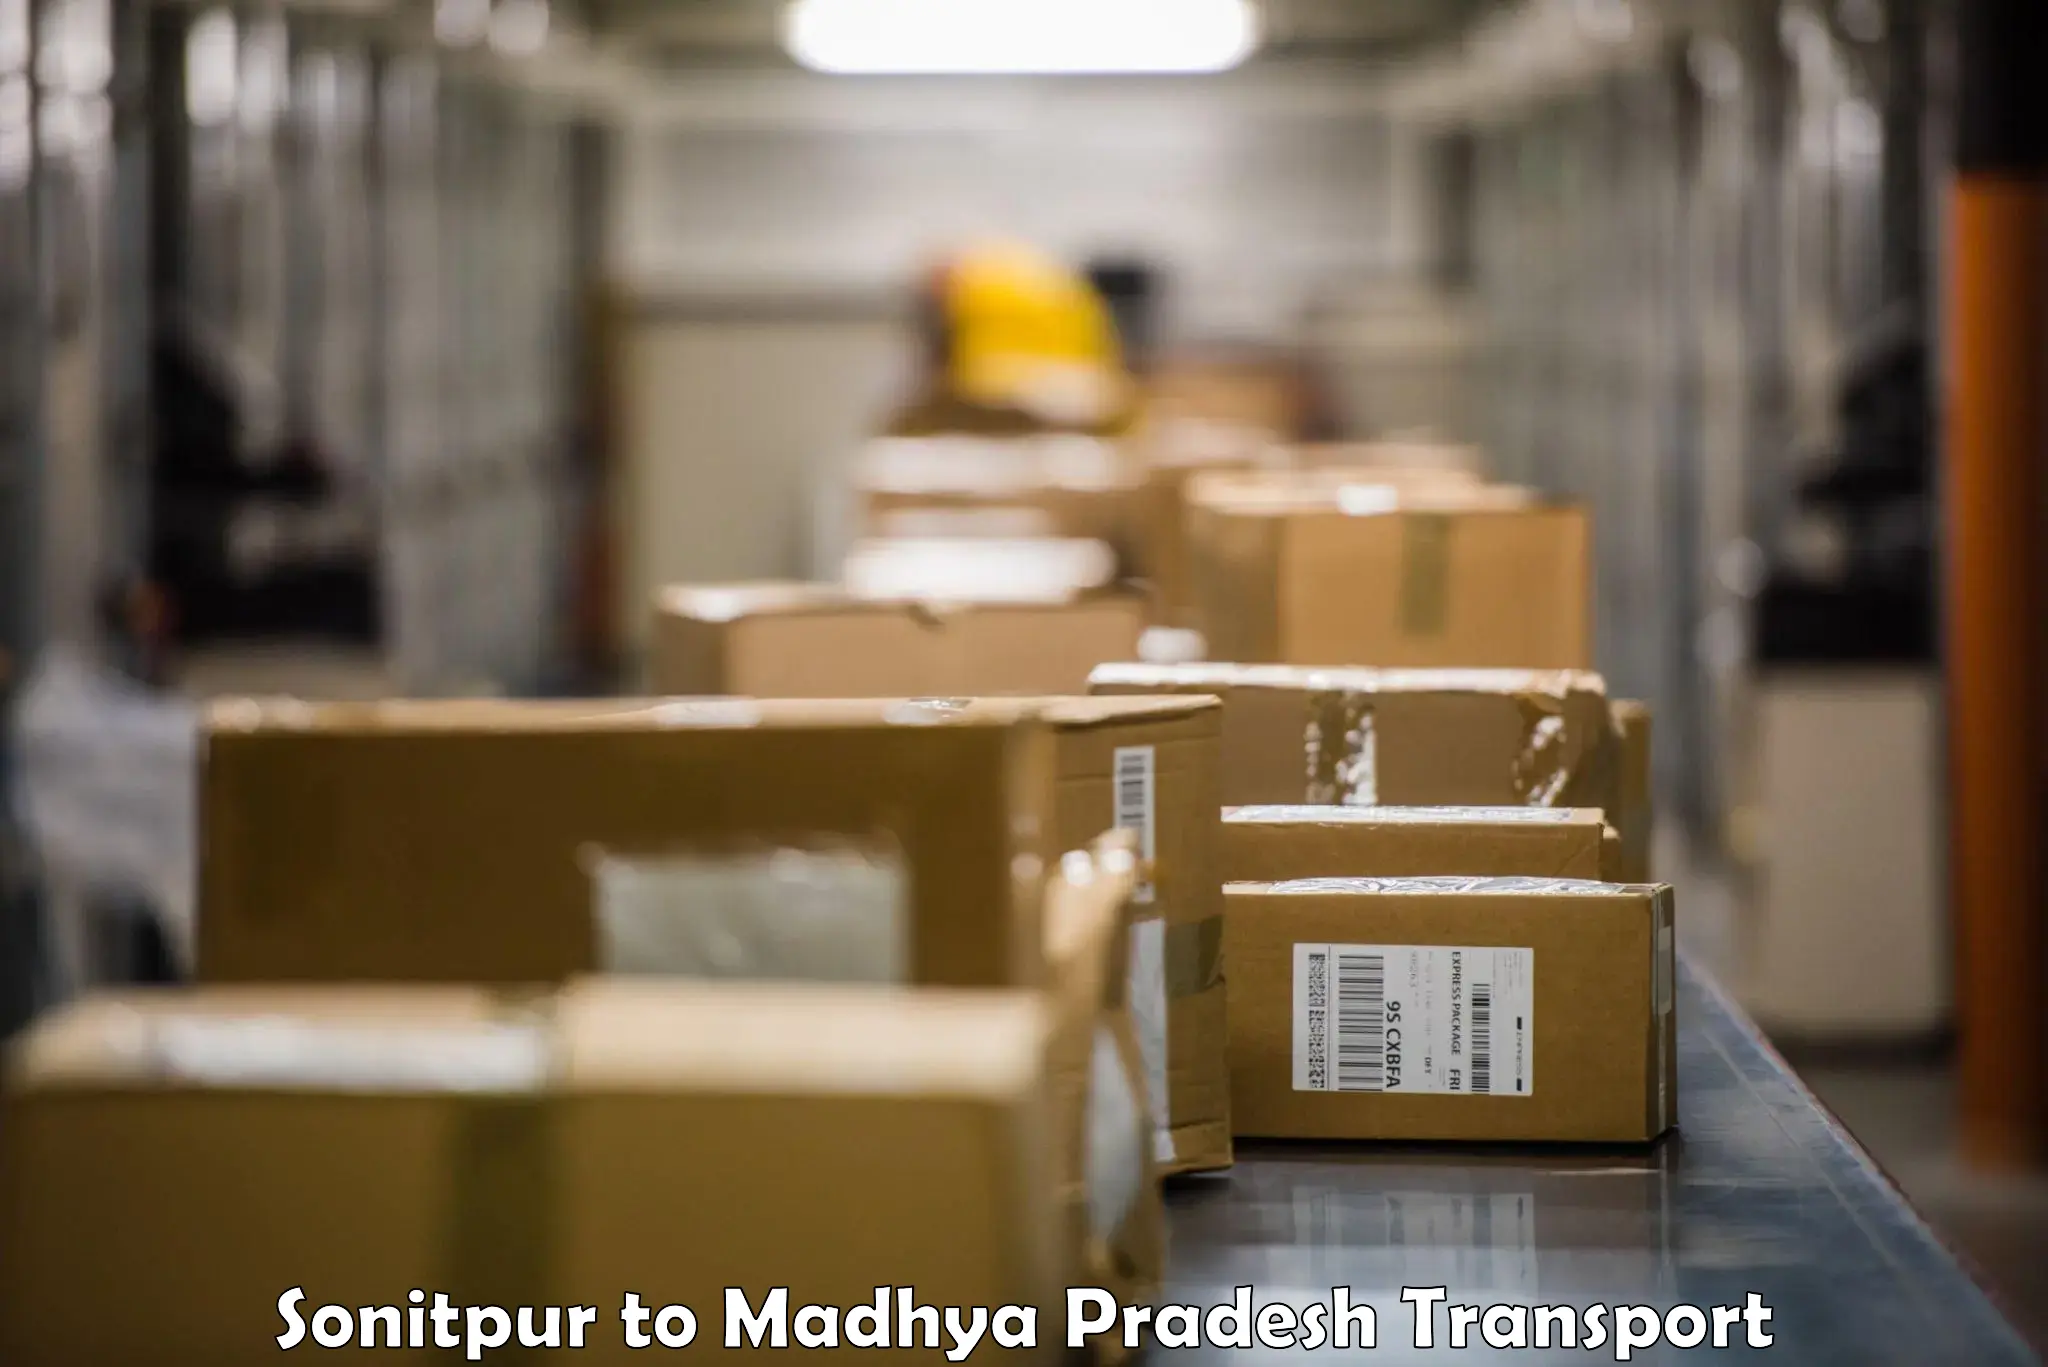 Truck transport companies in India Sonitpur to Satna